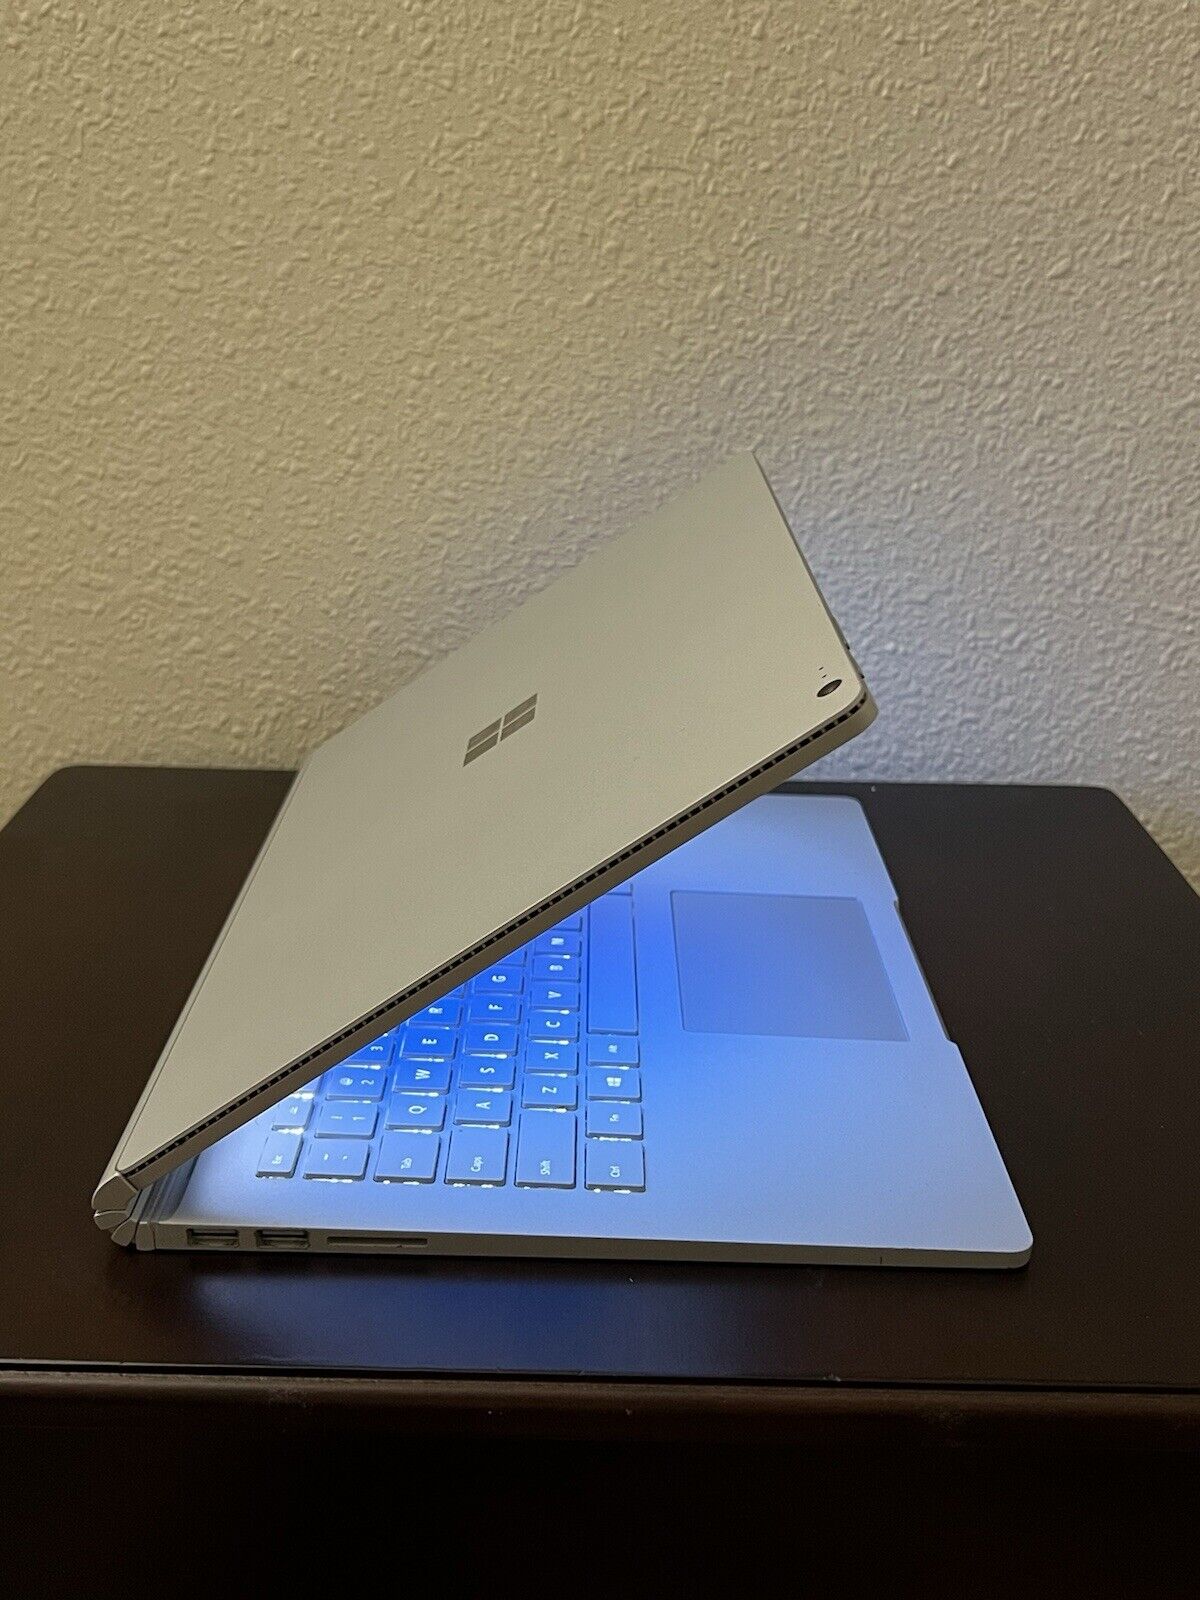 2in1 Microsoft Surface Laptop, TouchScreen, Core i5, 2.5GHz. MS Office Included.